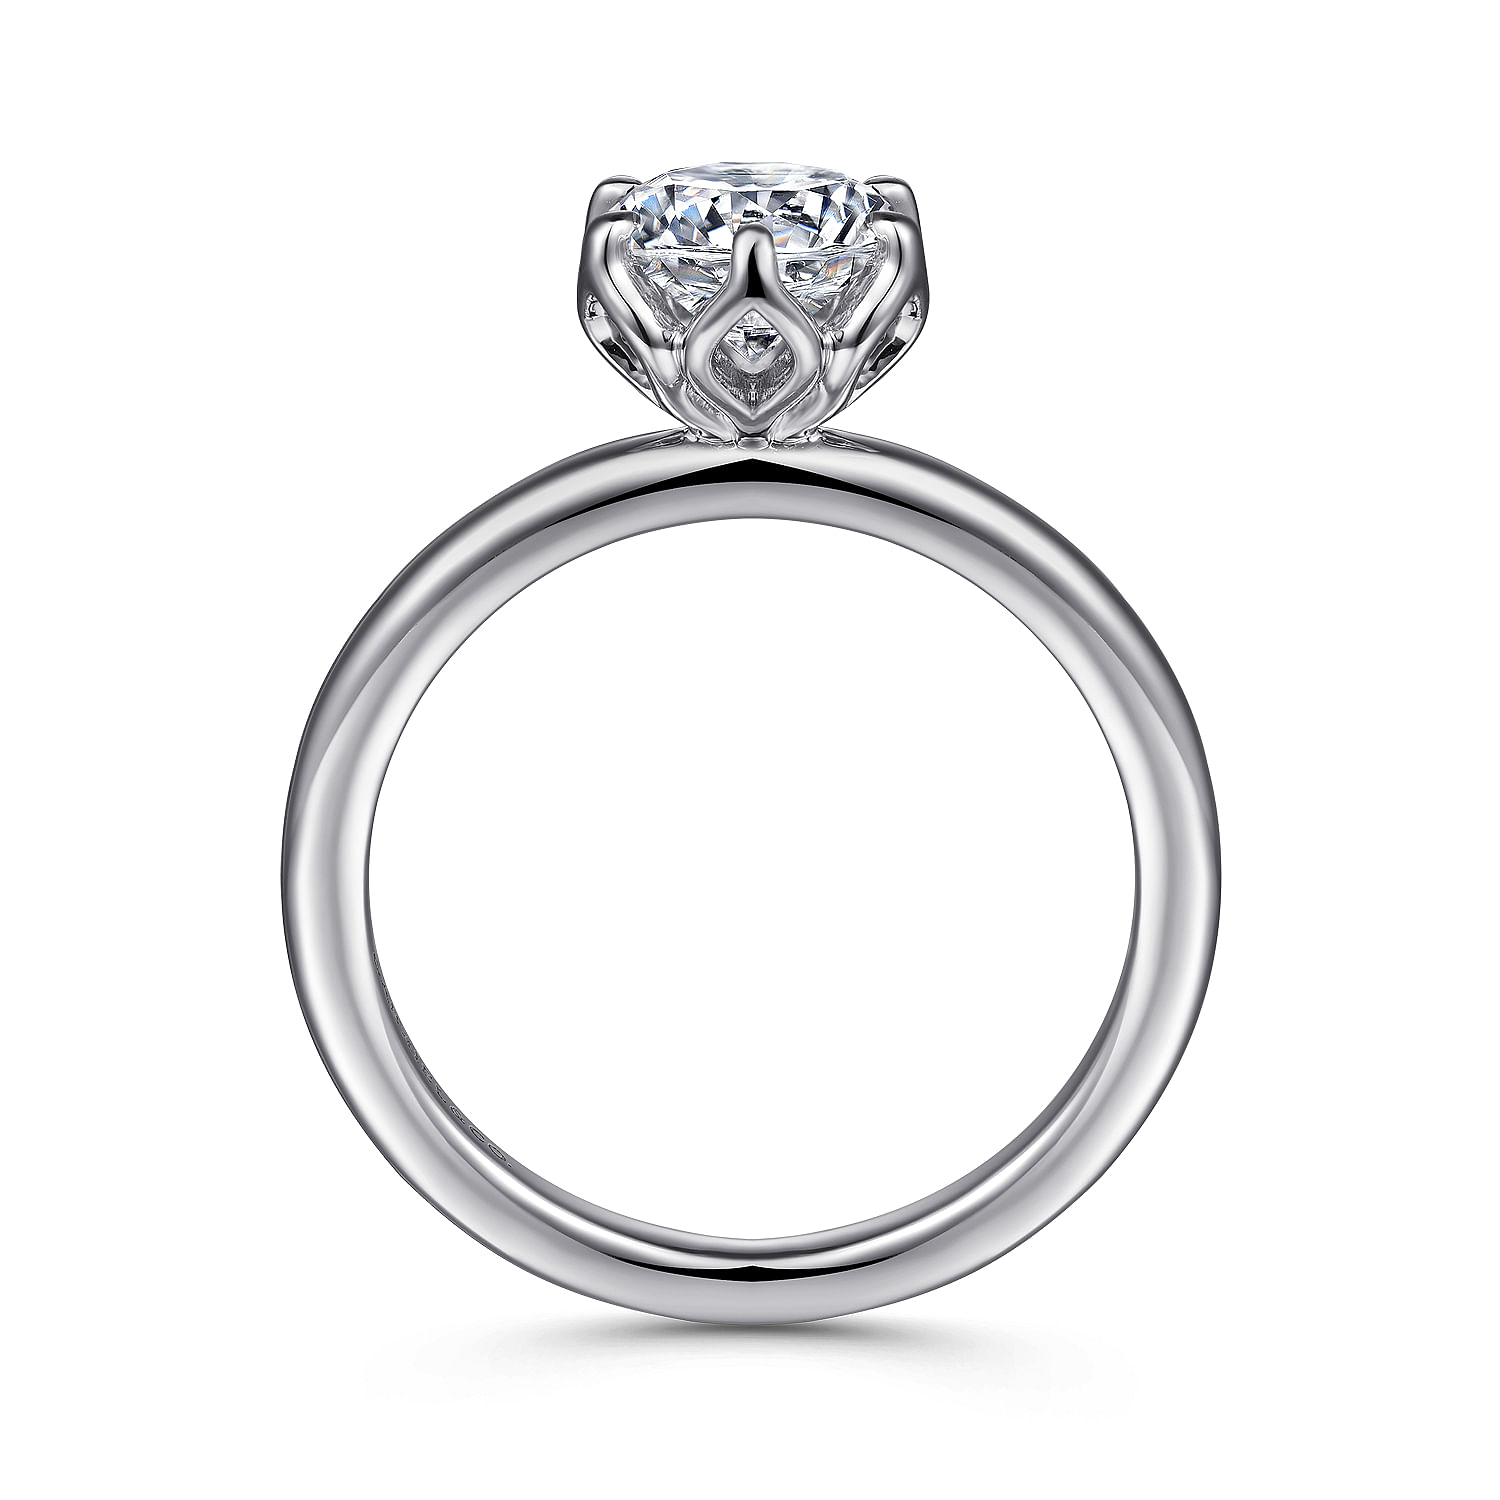 14K White Gold Round Solitaire
Engagement Ring